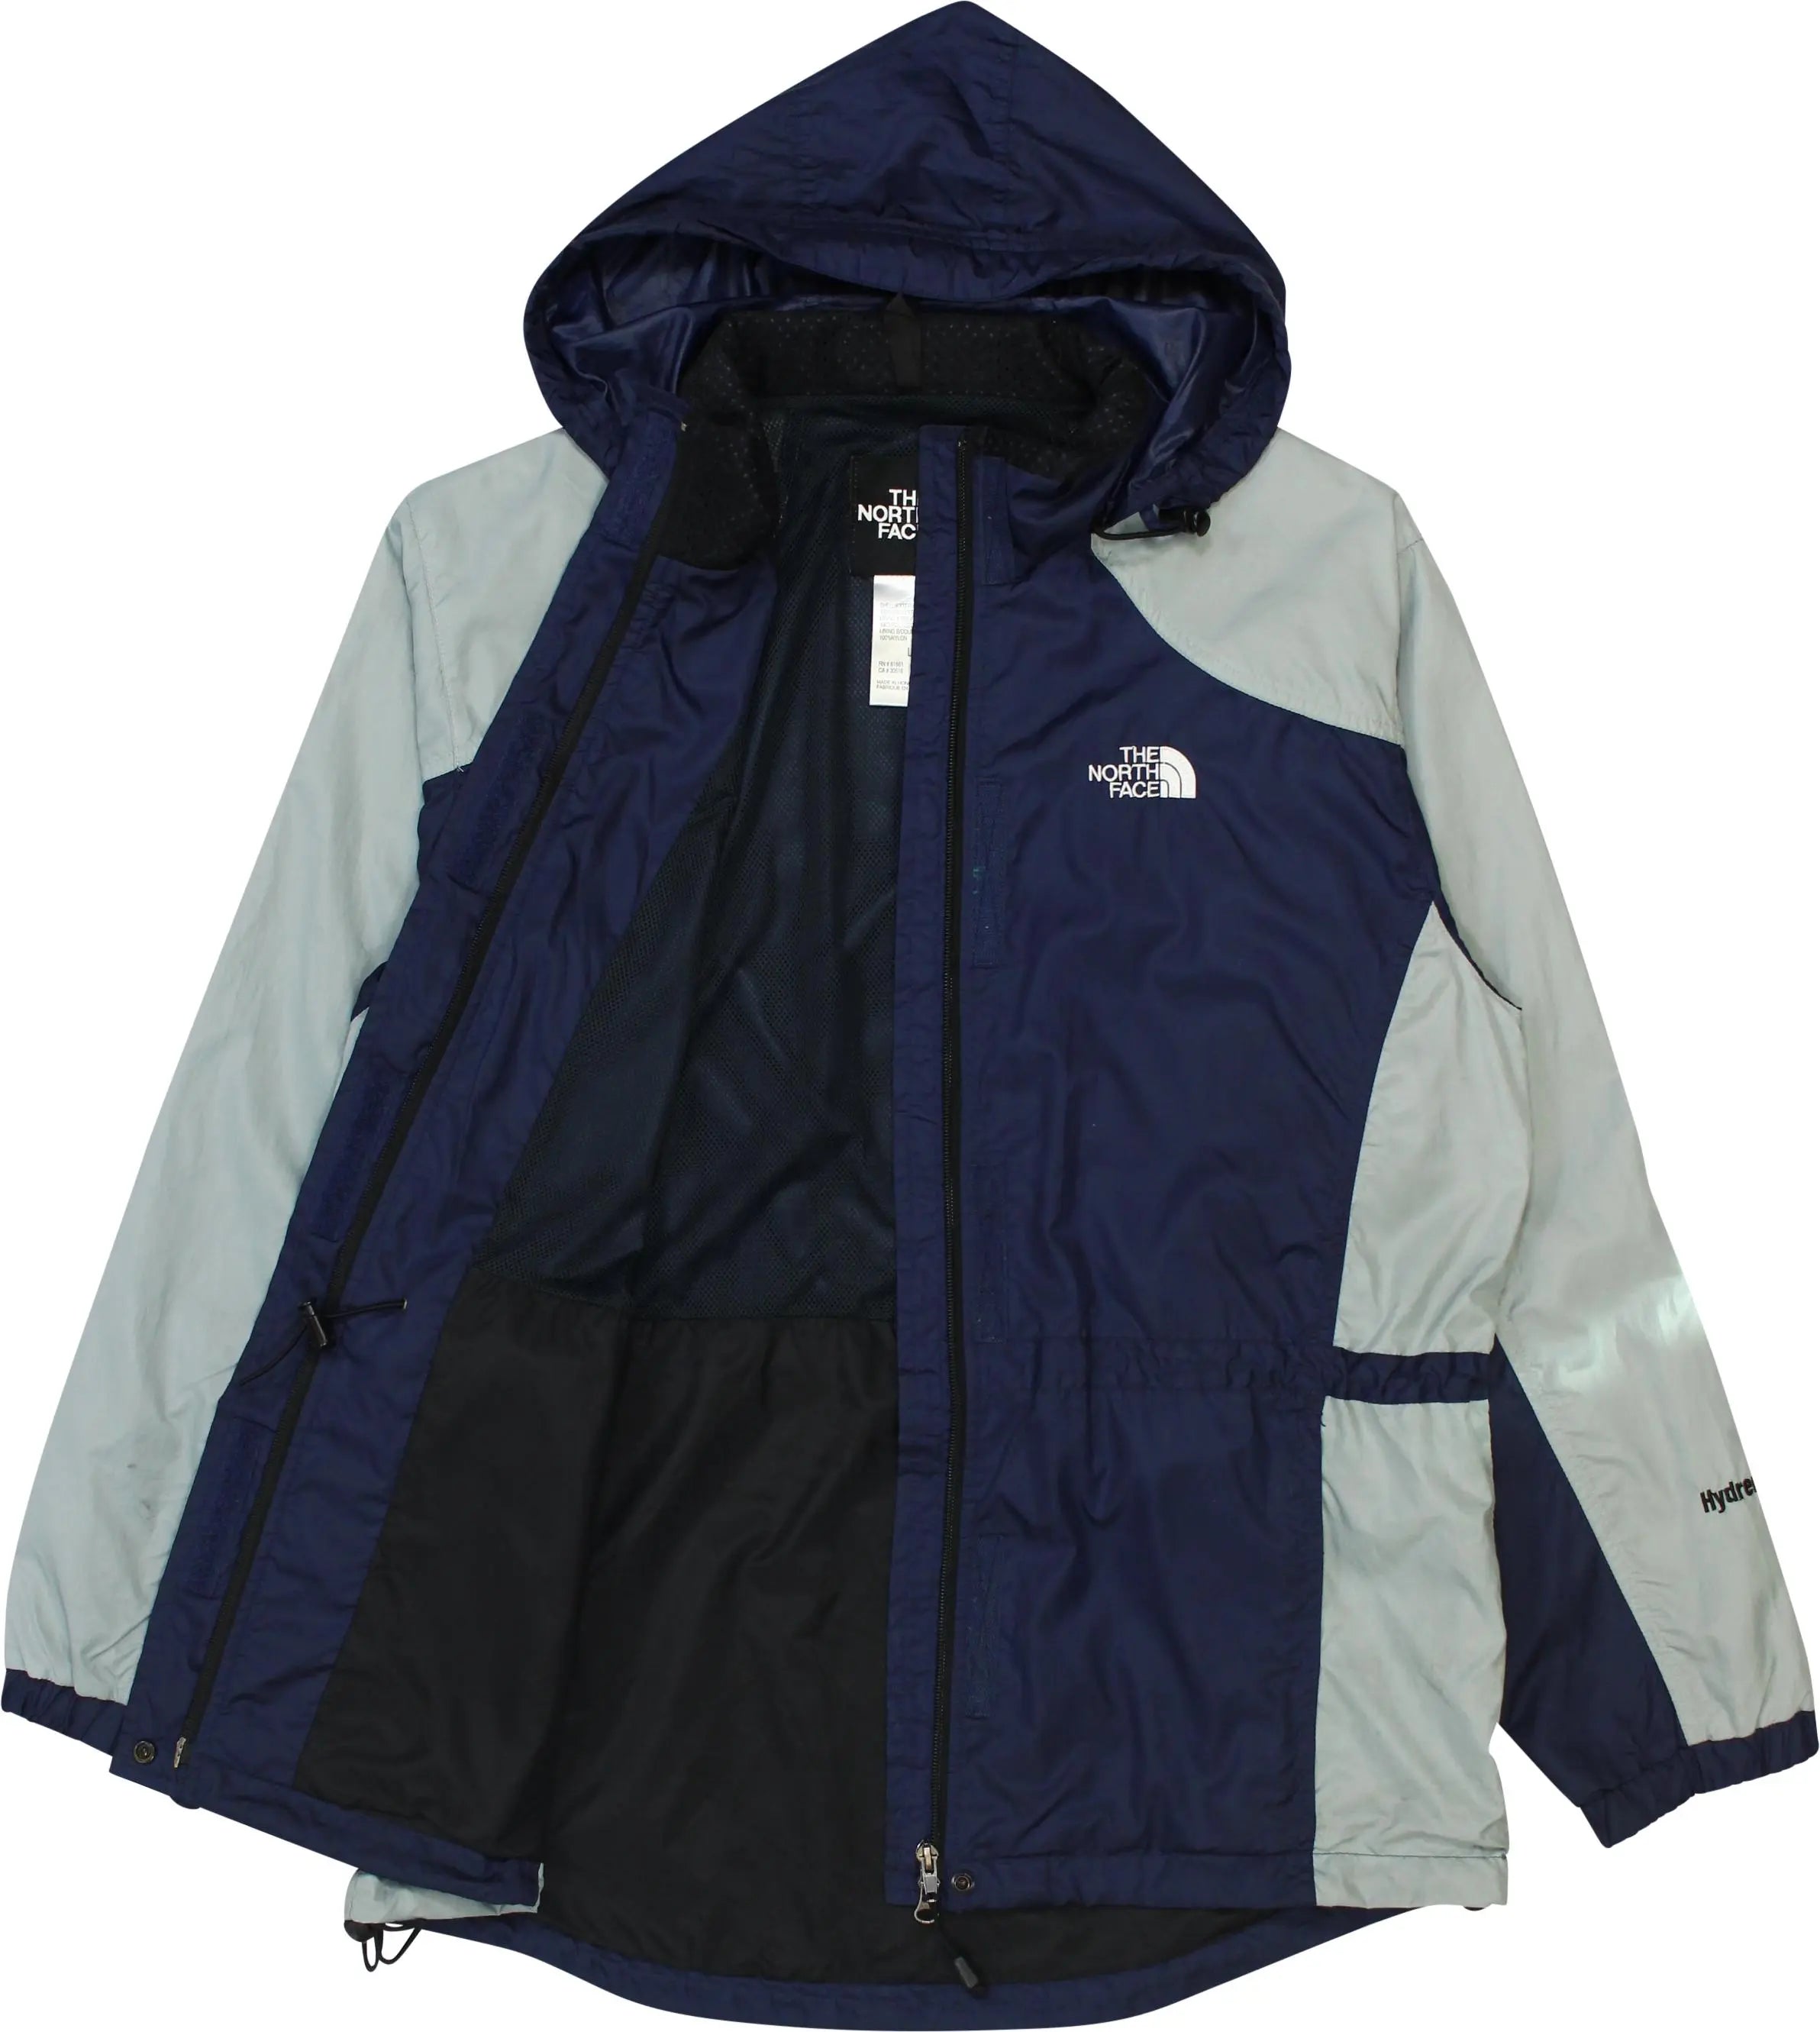 The North Face - 90s Hydrenaline Wind Jacket by The North face- ThriftTale.com - Vintage and second handclothing